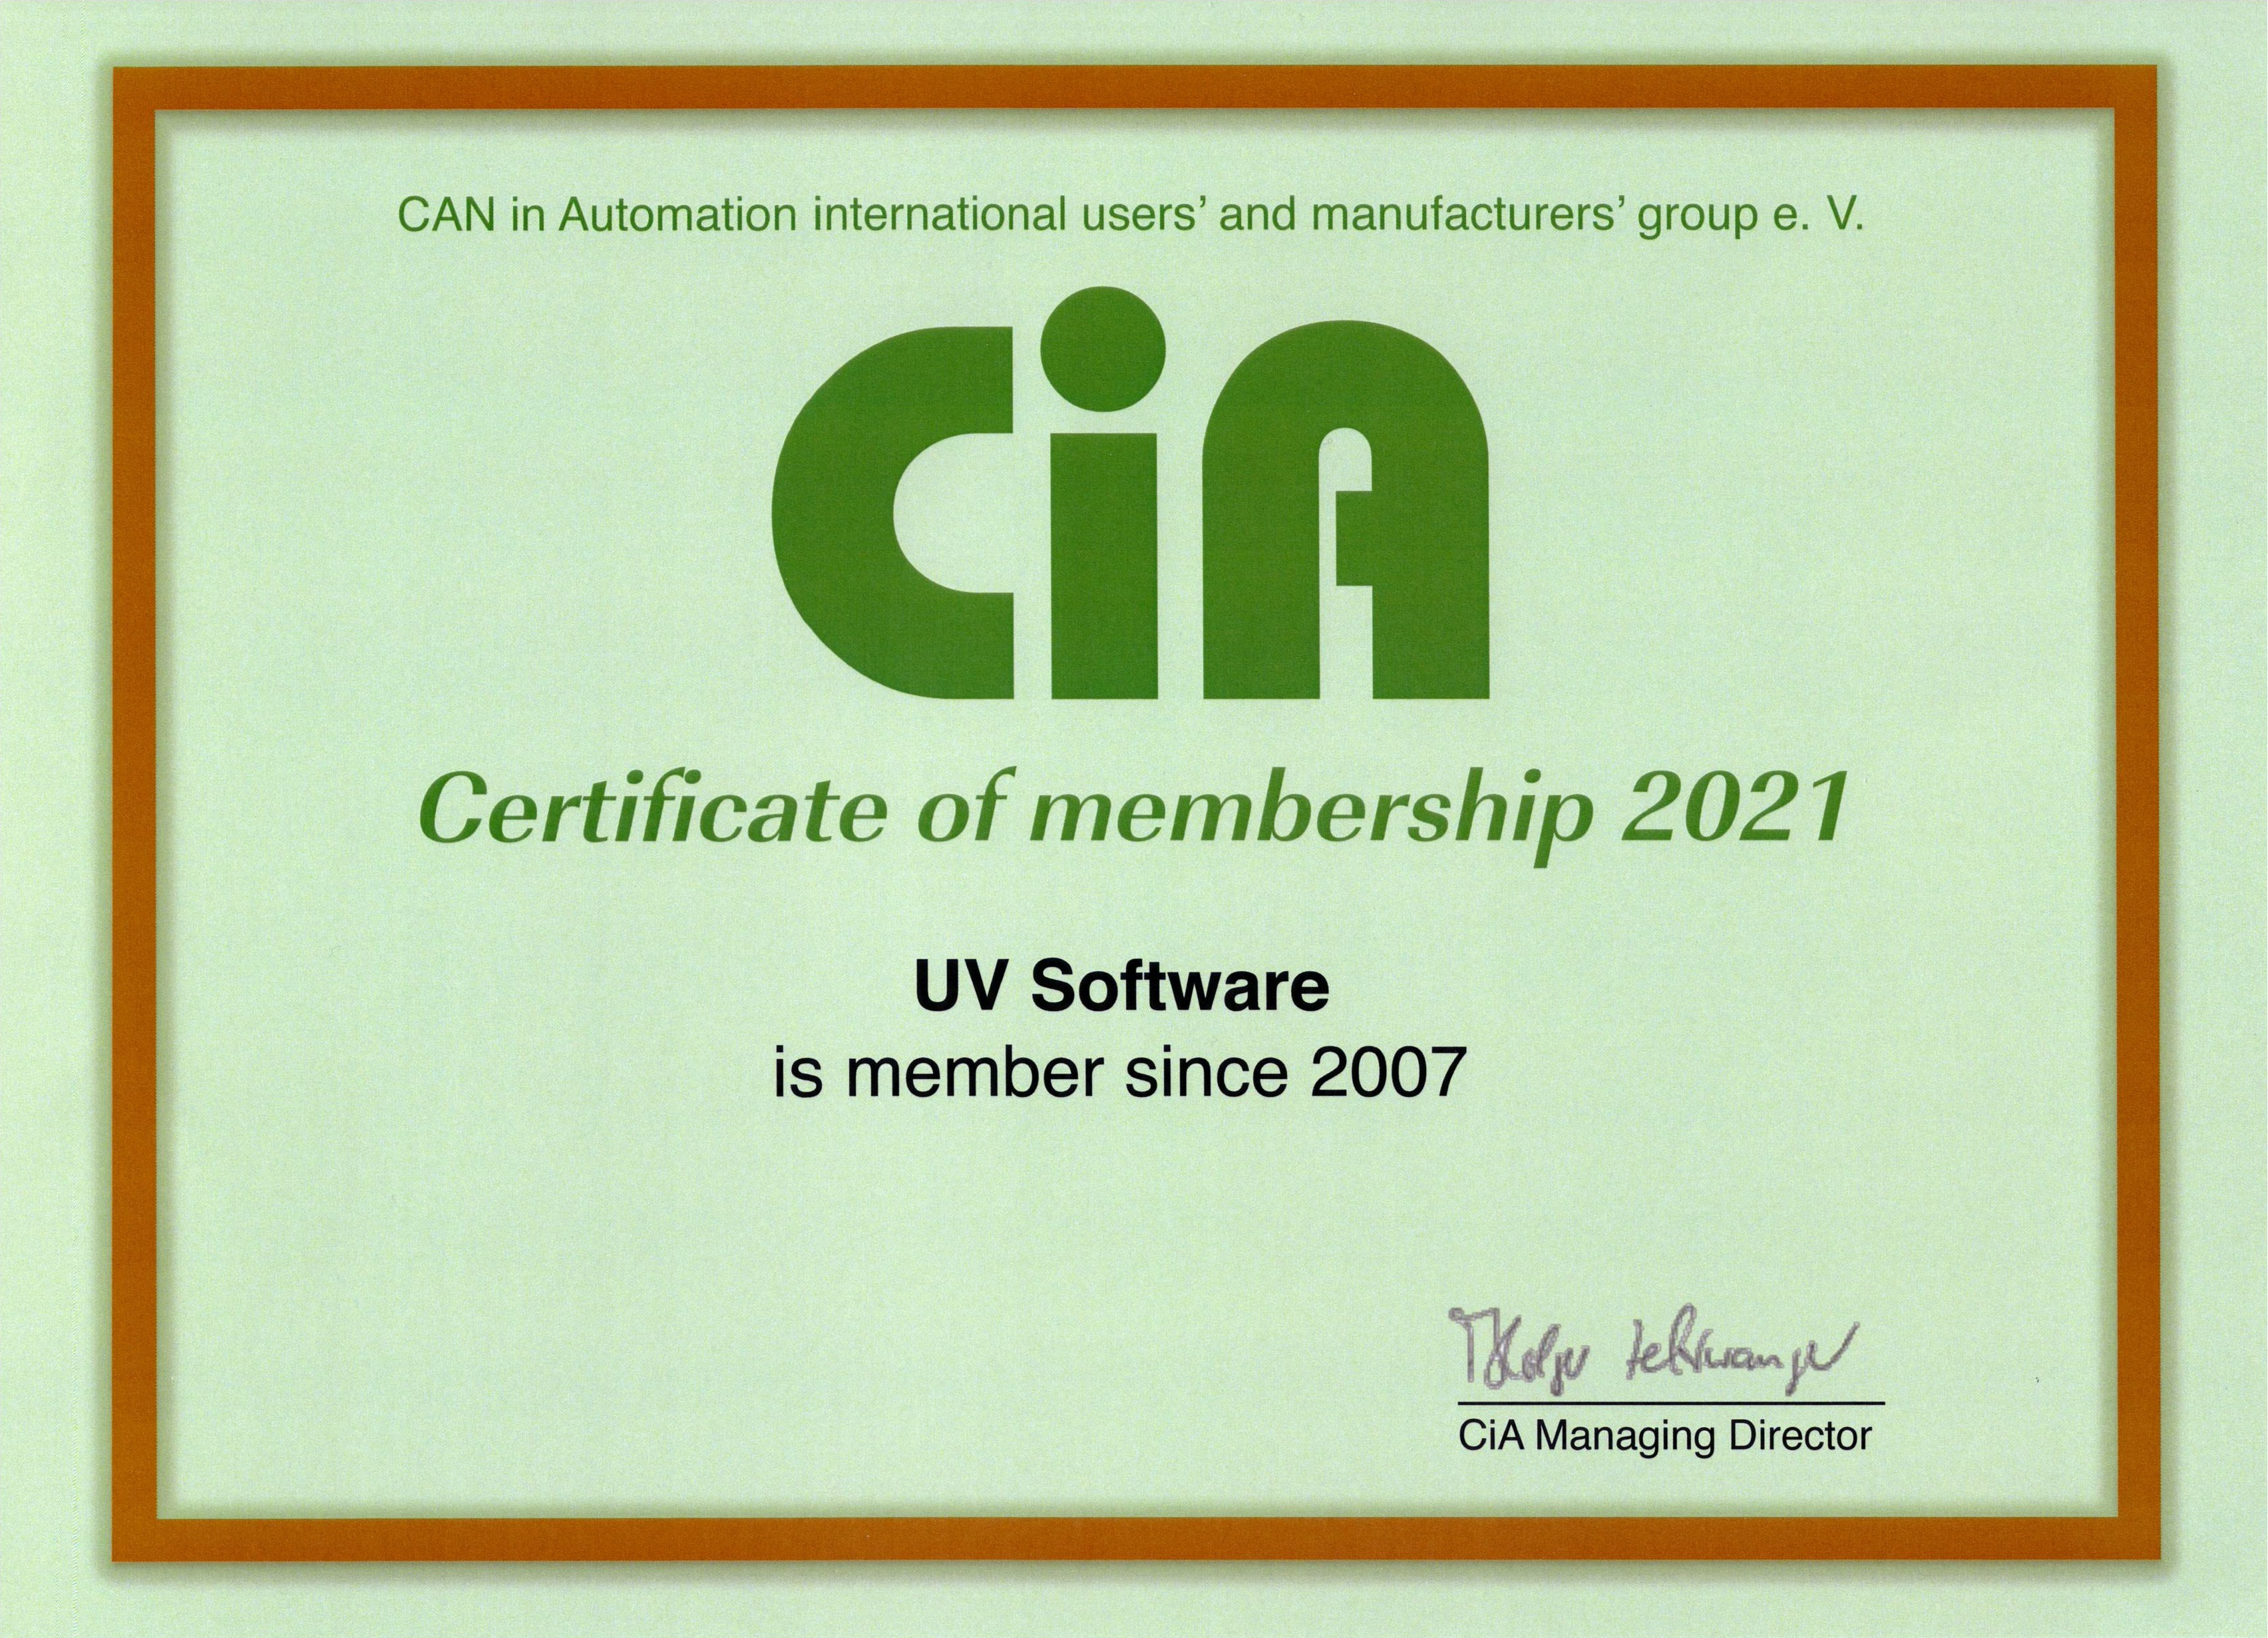 Membership in CiA (CAN in Automation e.V.)